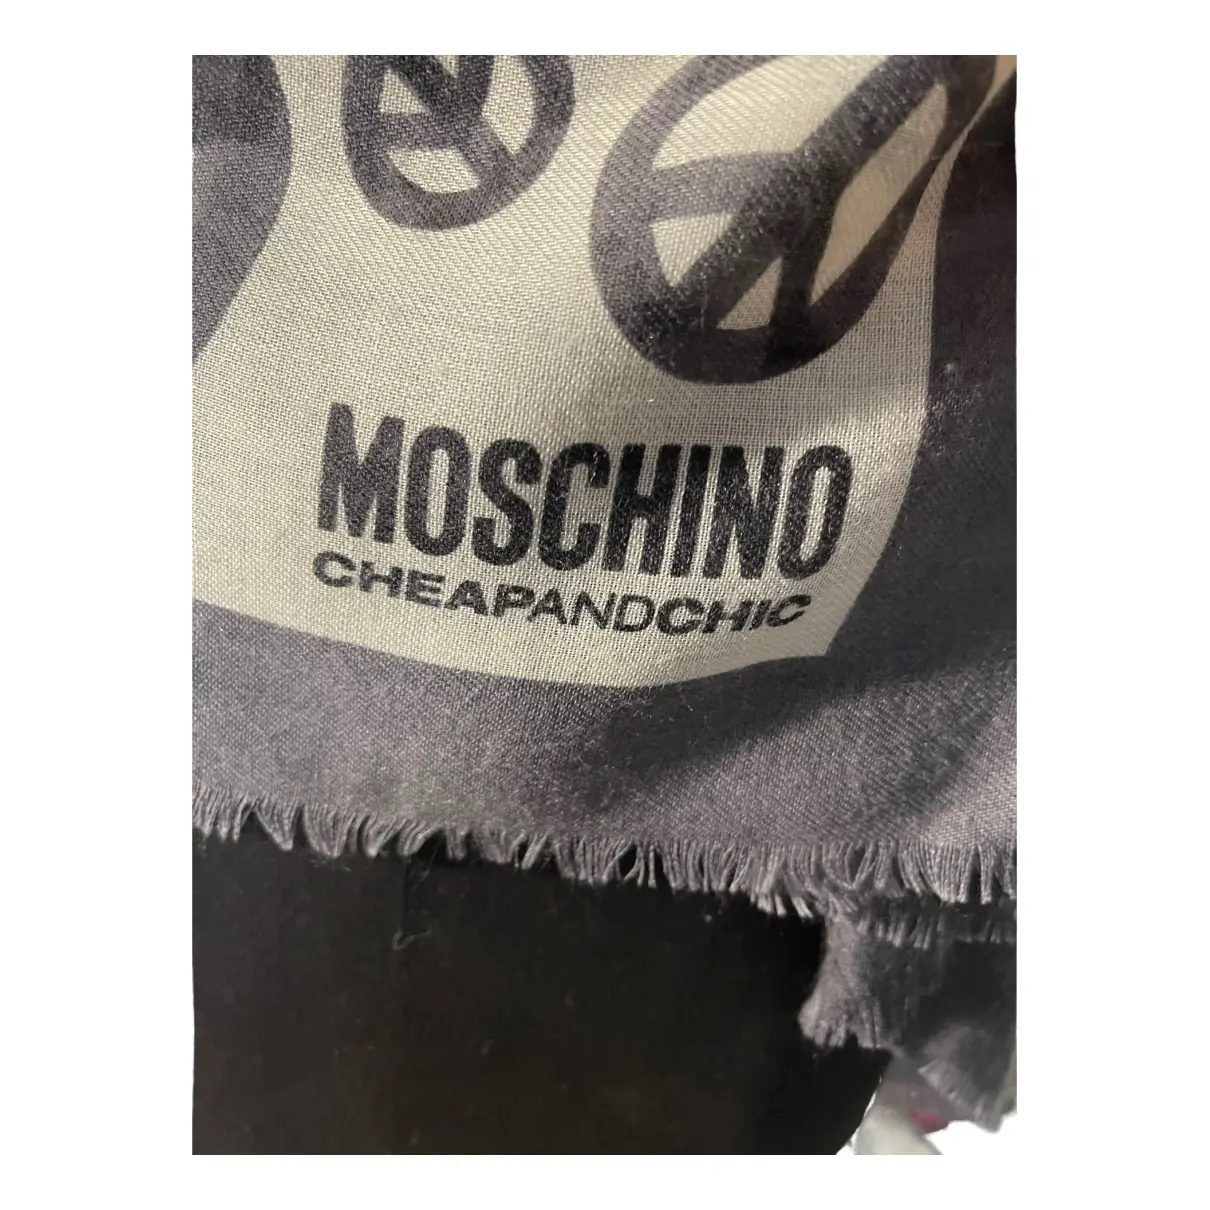 Buy Moschino Cheap And Chic Cashmere stole online - Vintage